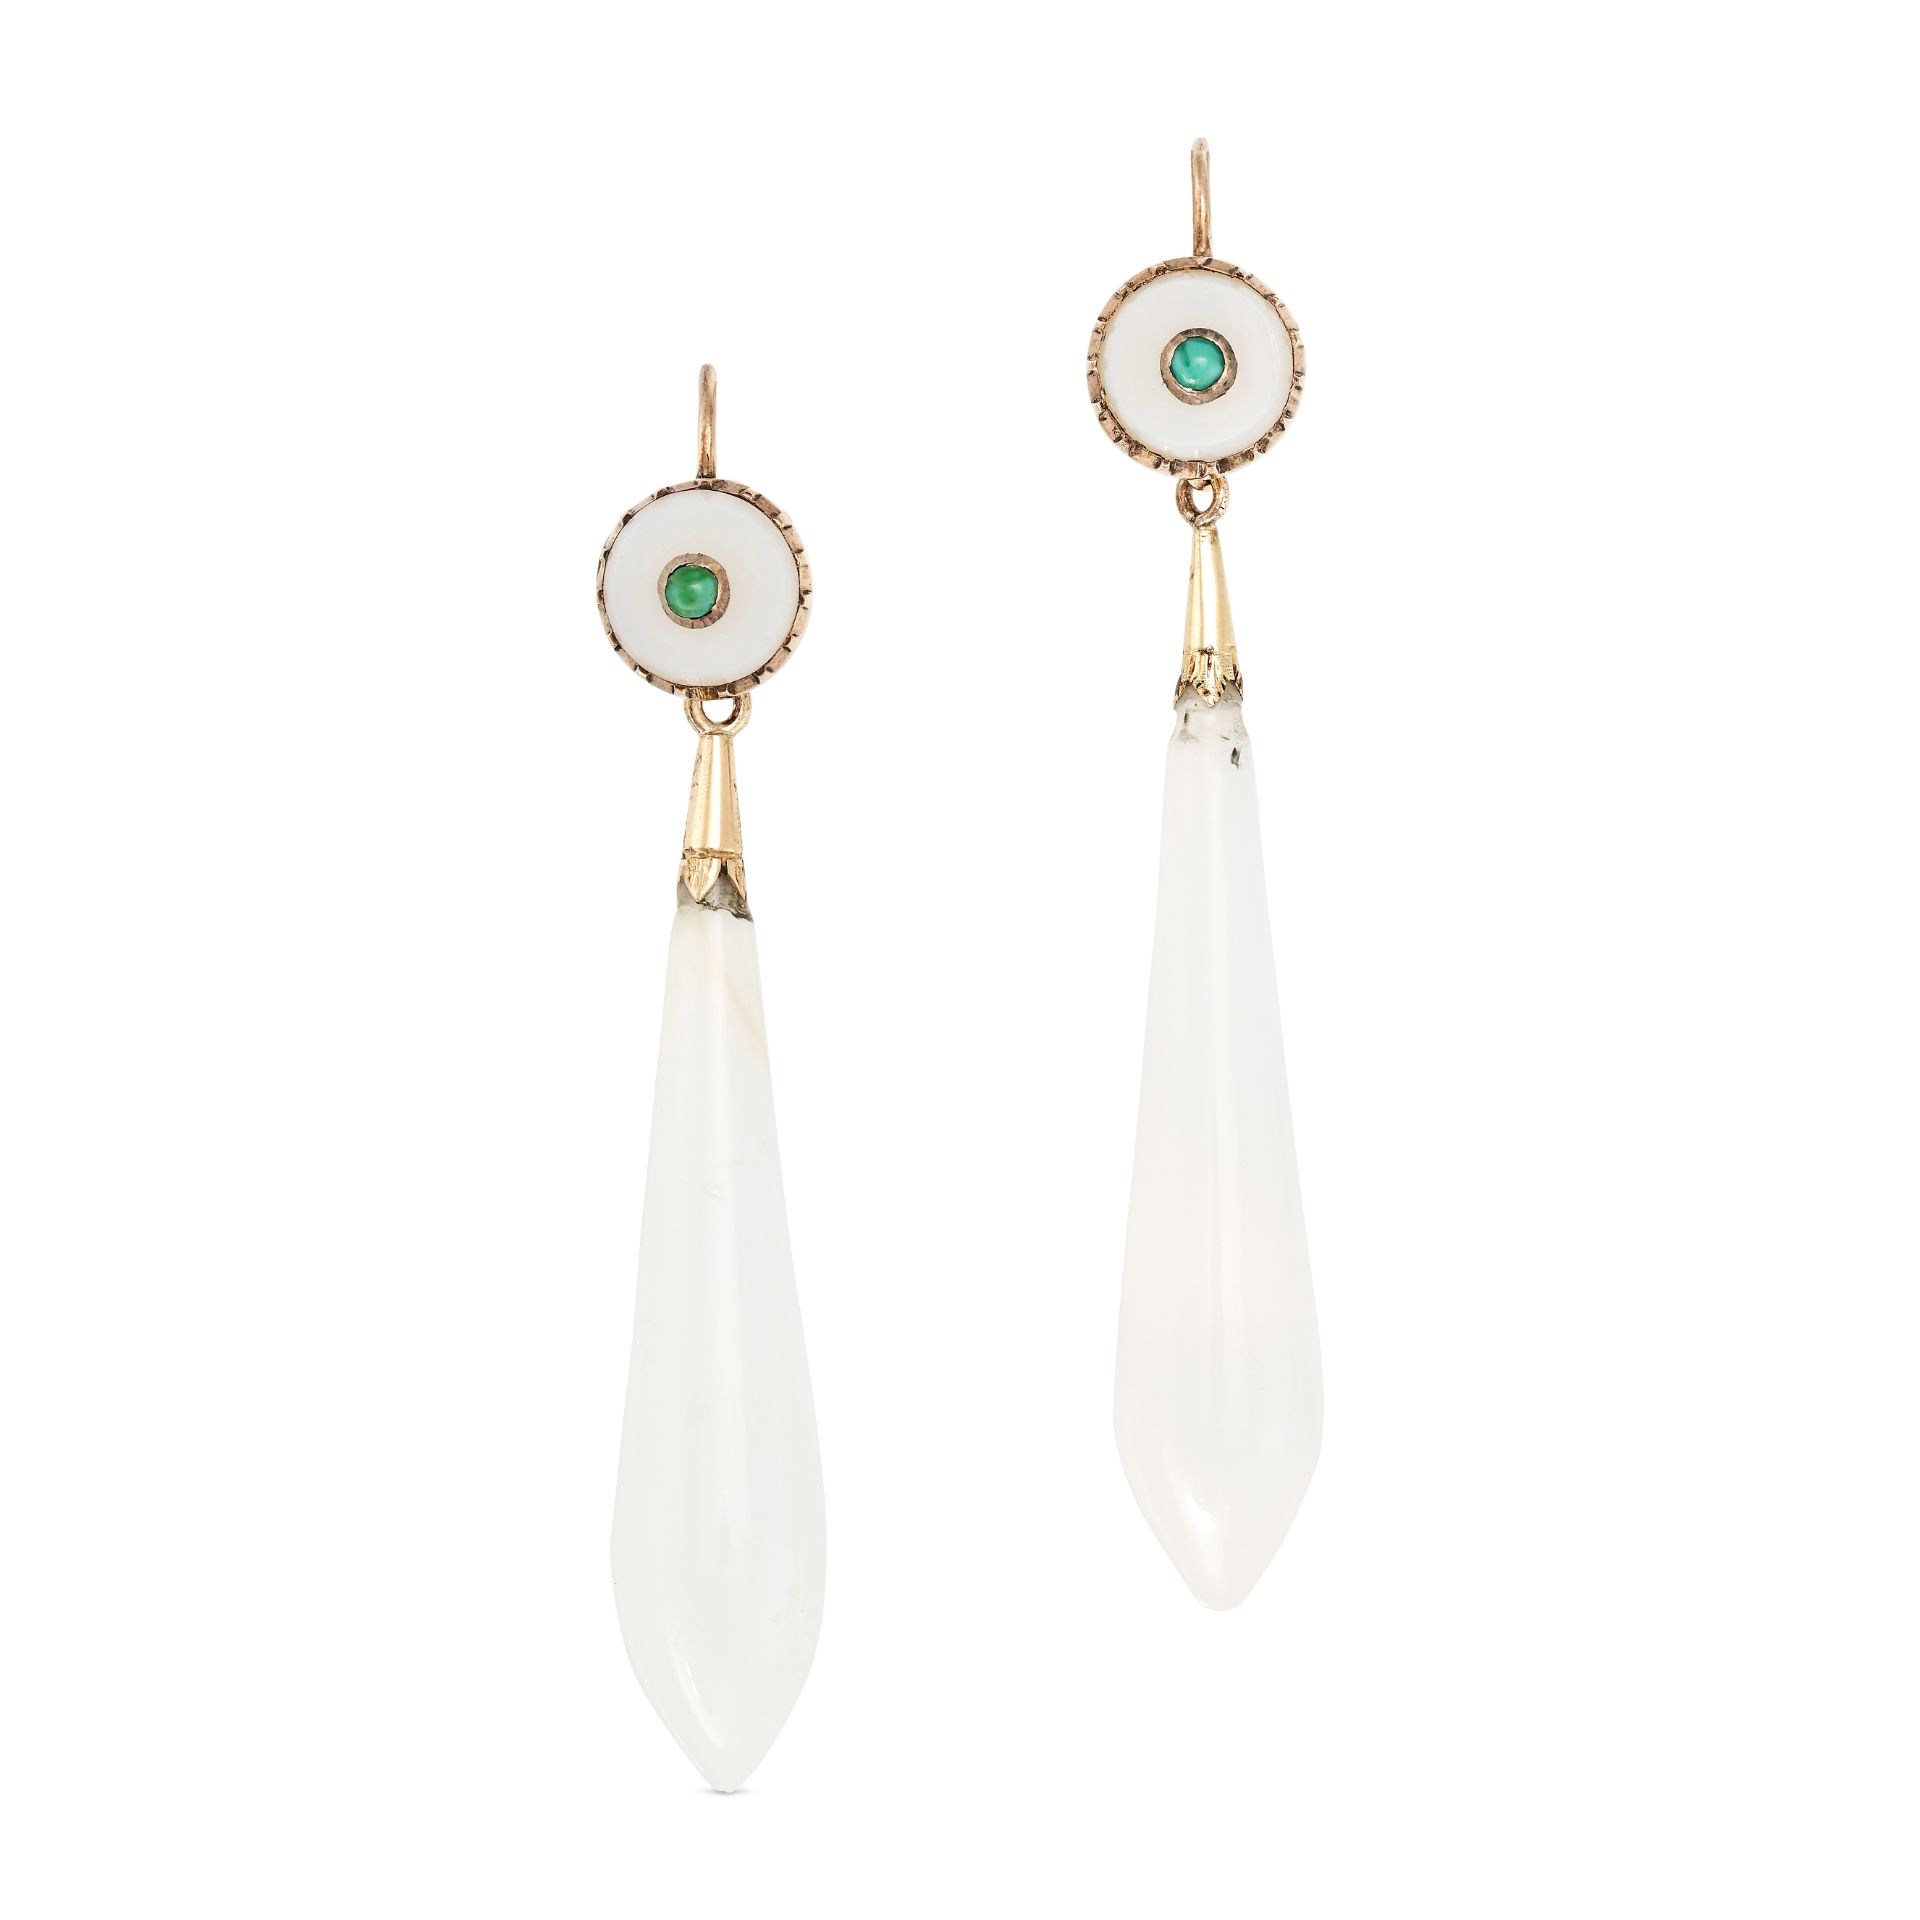 A PAIR OF ANTIQUE TURQUOISE AND CHALCEDONY DROP EARRINGS in yellow gold, each top with a circular...